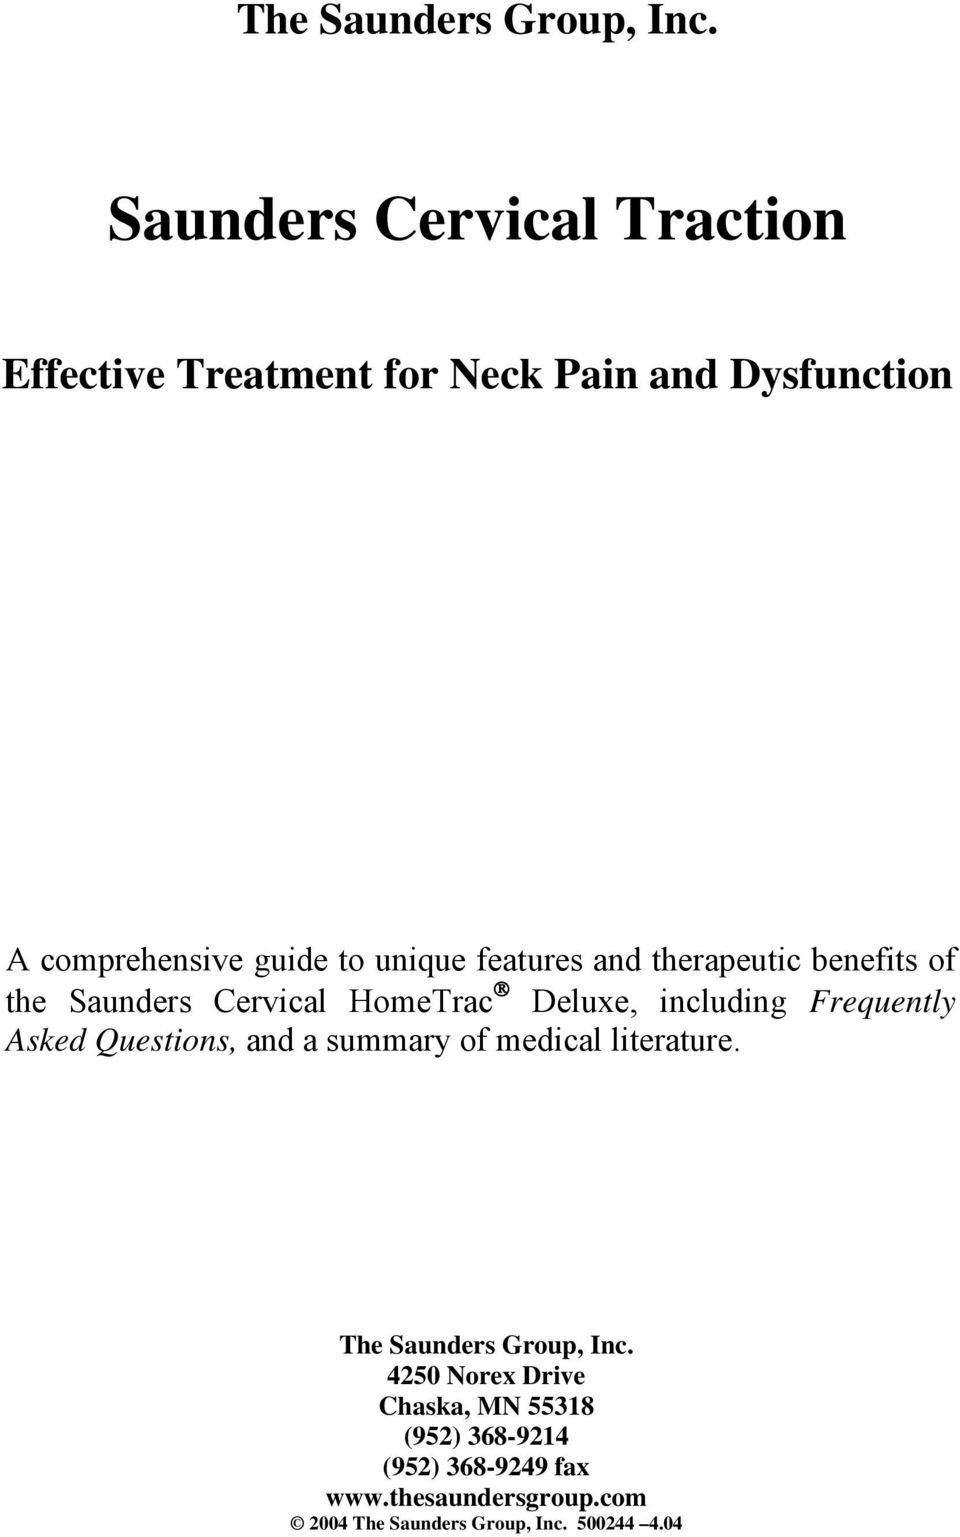 features and therapeutic benefits of the Saunders Cervical HomeTrac Deluxe, including Frequently Asked